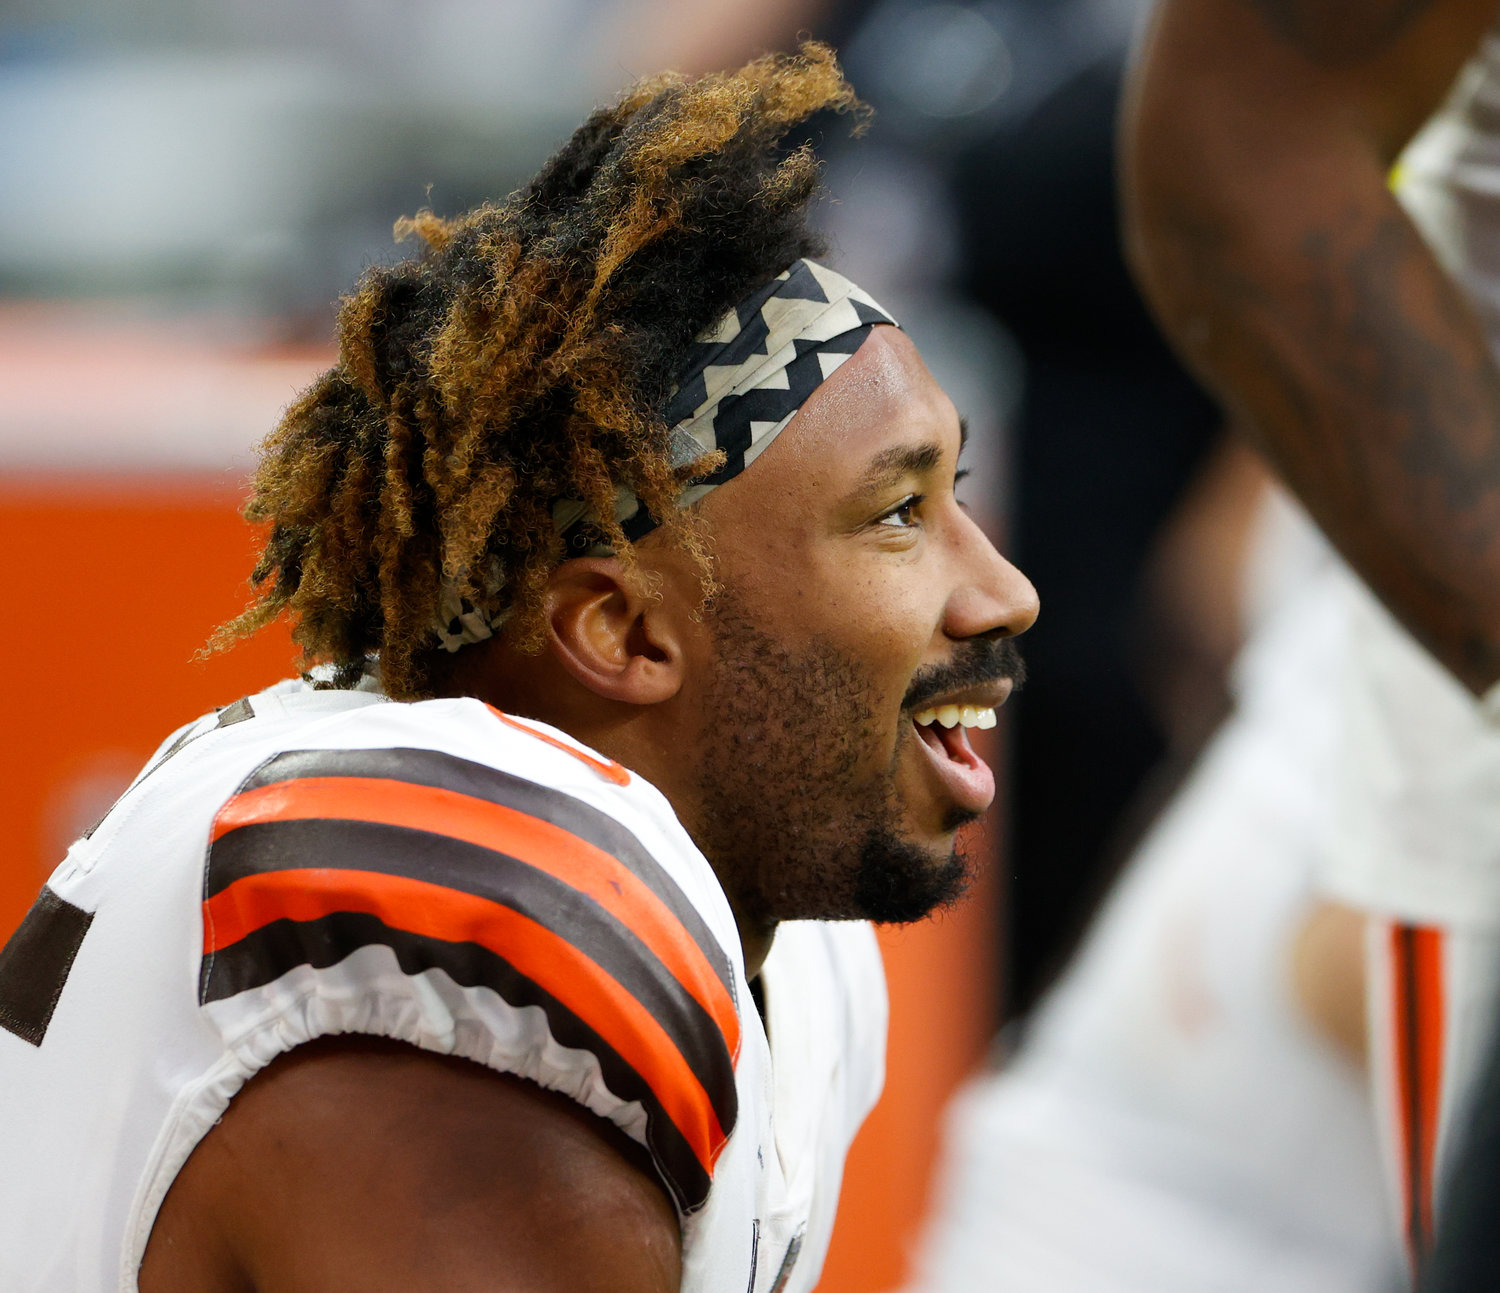 Cleveland Browns defensive end Myles Garrett (95) on the sideline during an NFL game between the Houston Texans and the Cleveland Browns on Dec. 4, 2022, in Houston. The Browns won, 27-14.